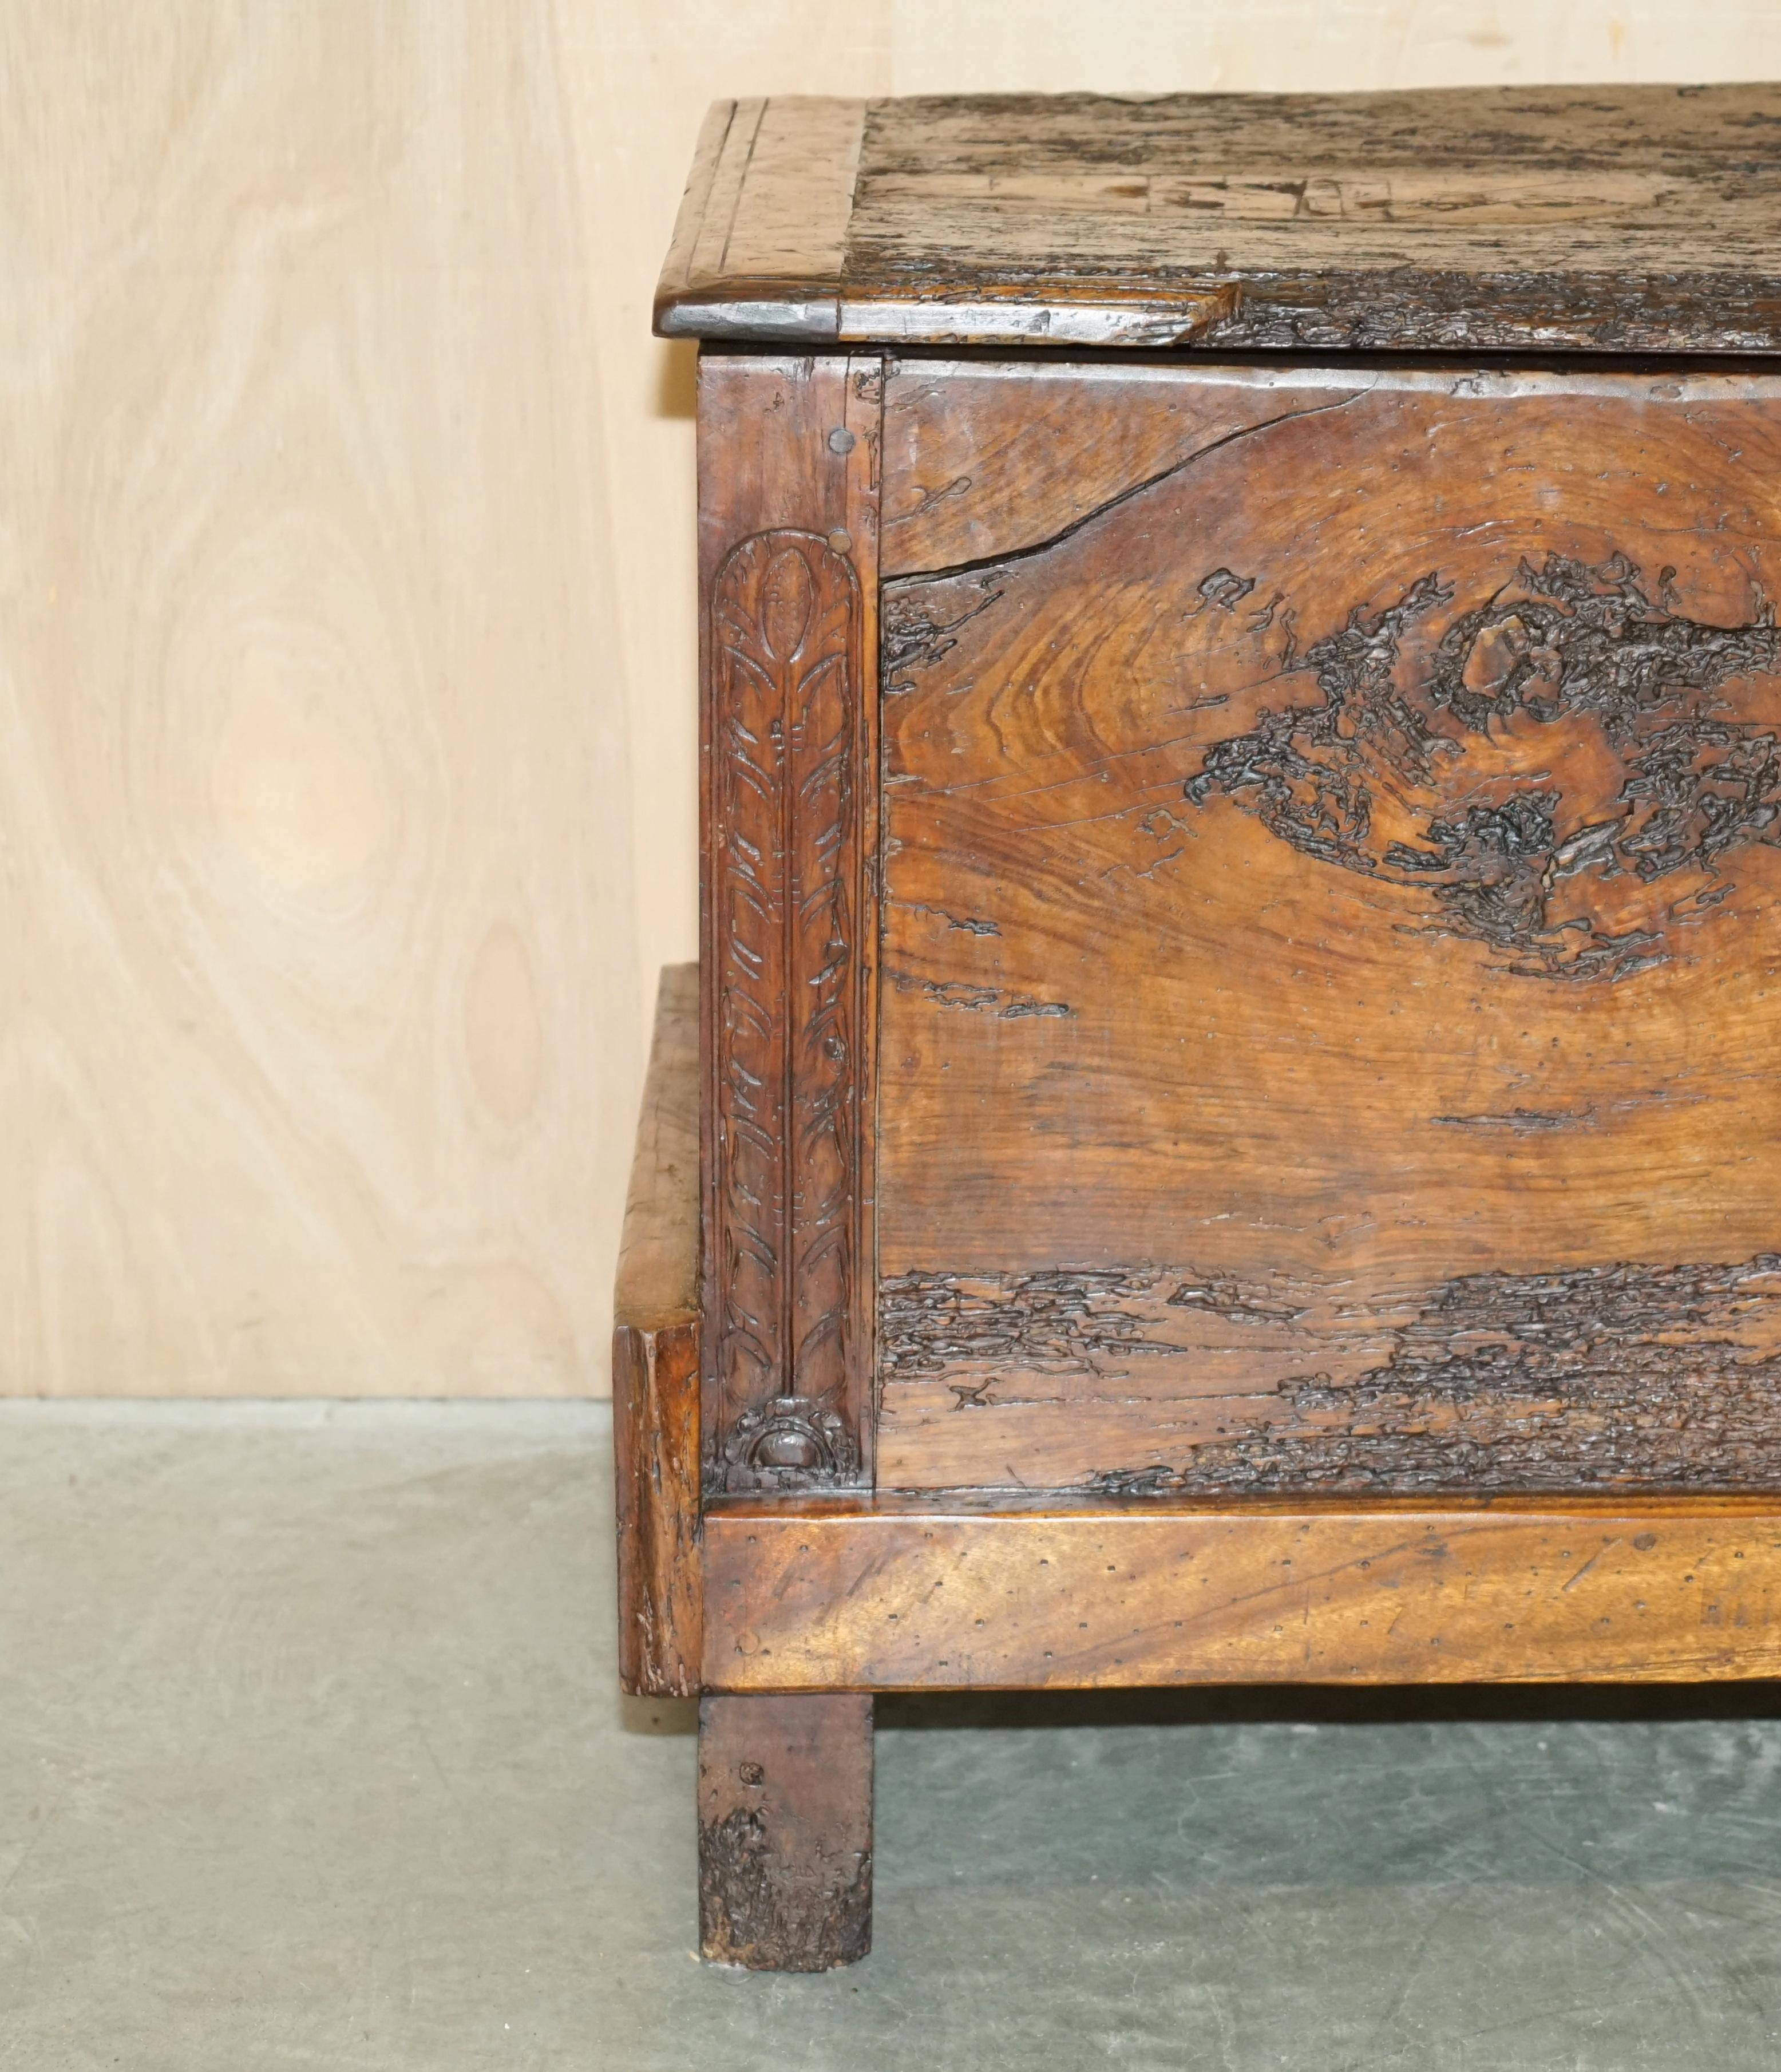 English ANTiQUE 18TH CENTURY SIX PLANK HEAVILY BURRED CHESTNUT WOOD TRUNK CHEST For Sale